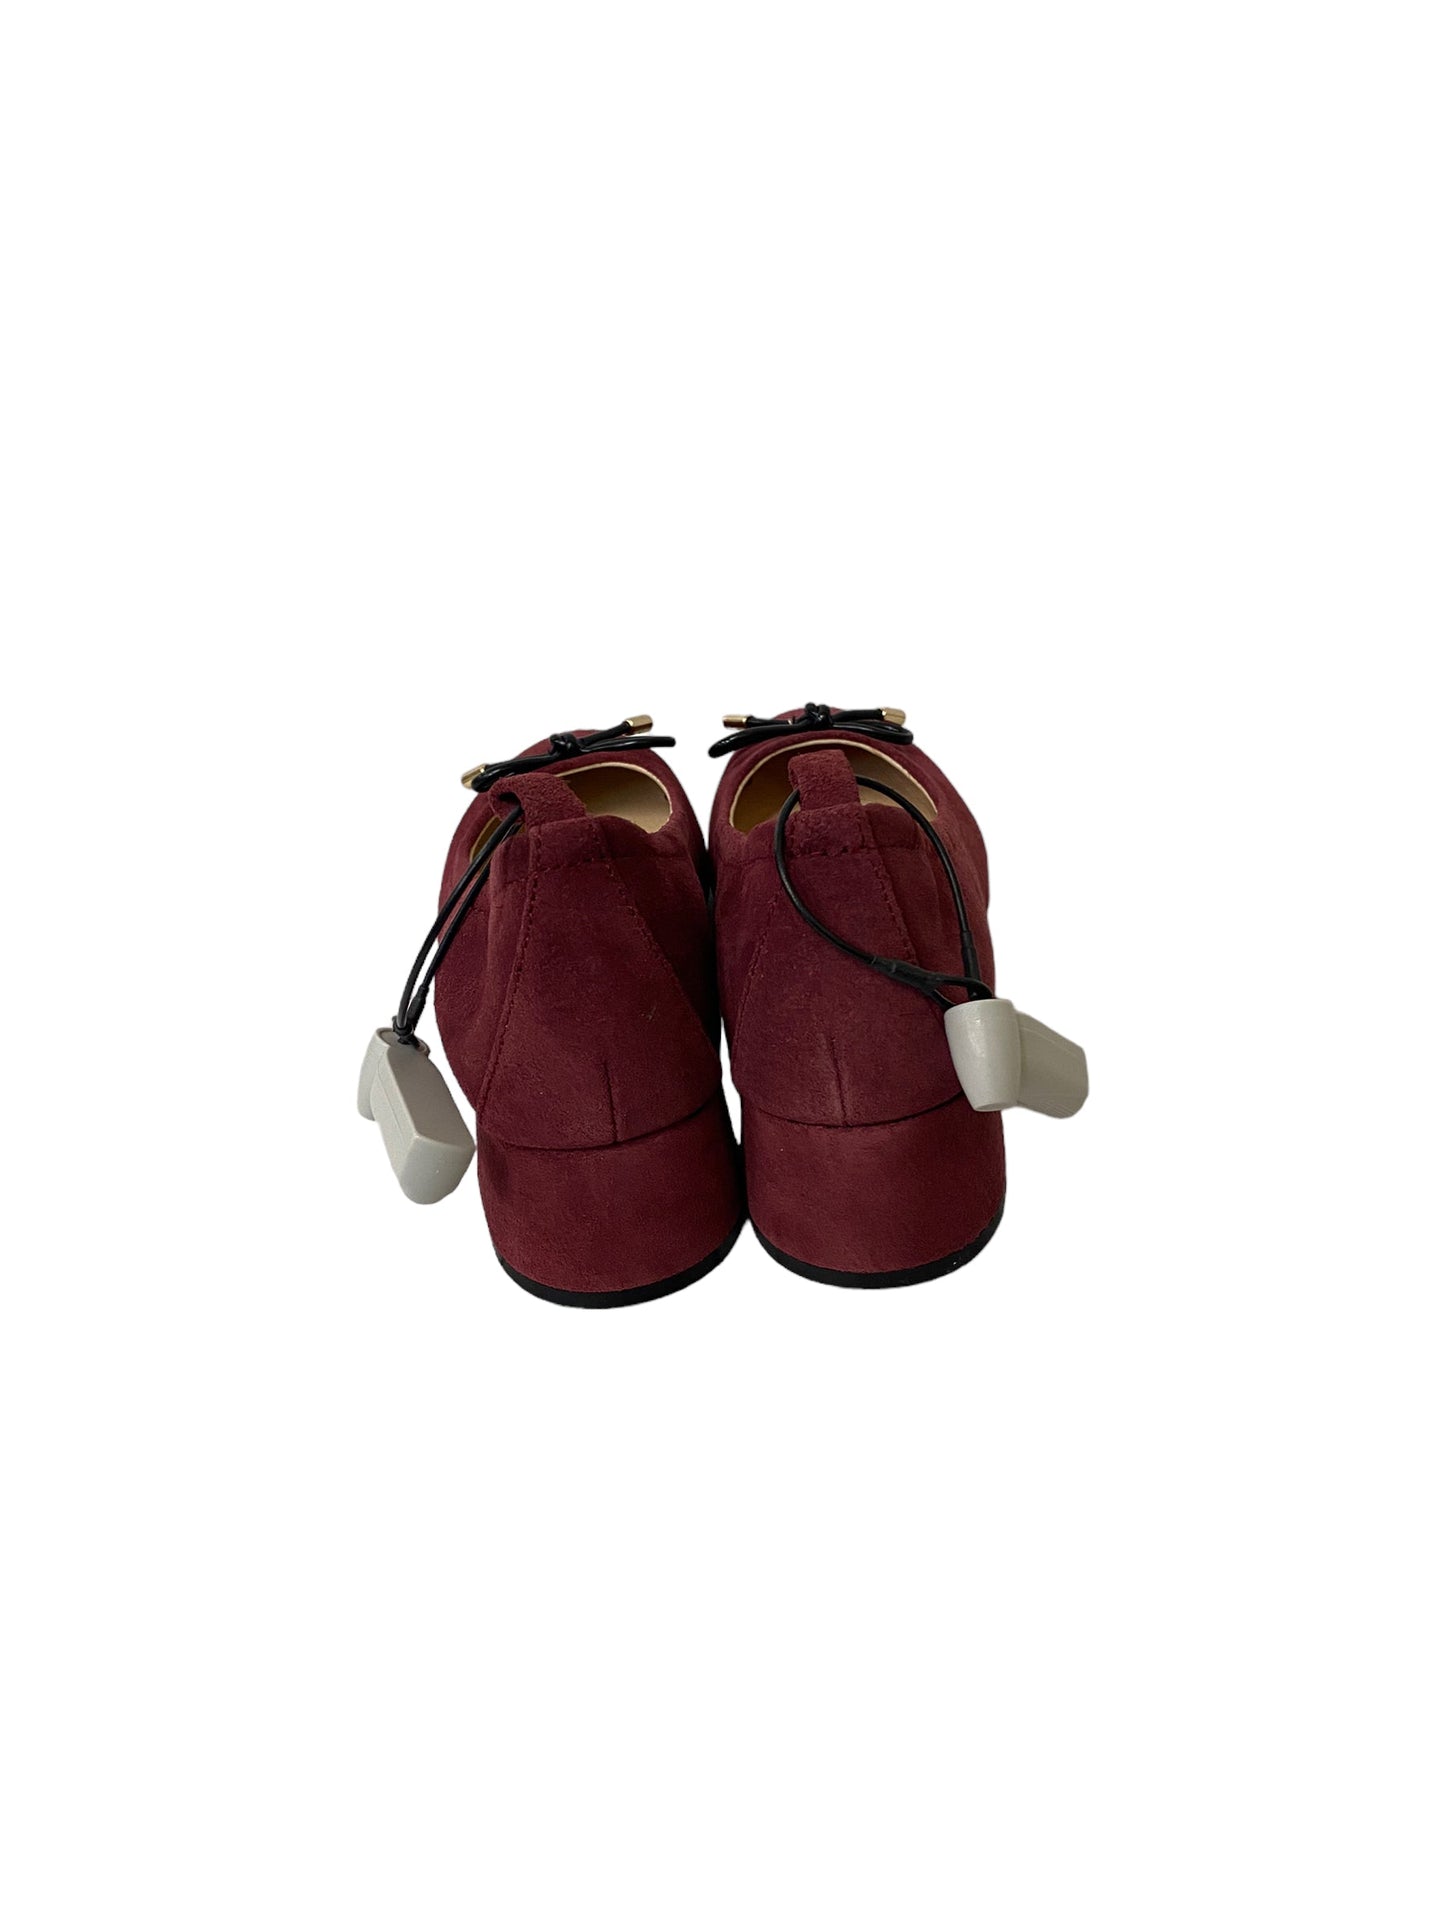 Shoes Heels Block By Jack Rogers  Size: 5